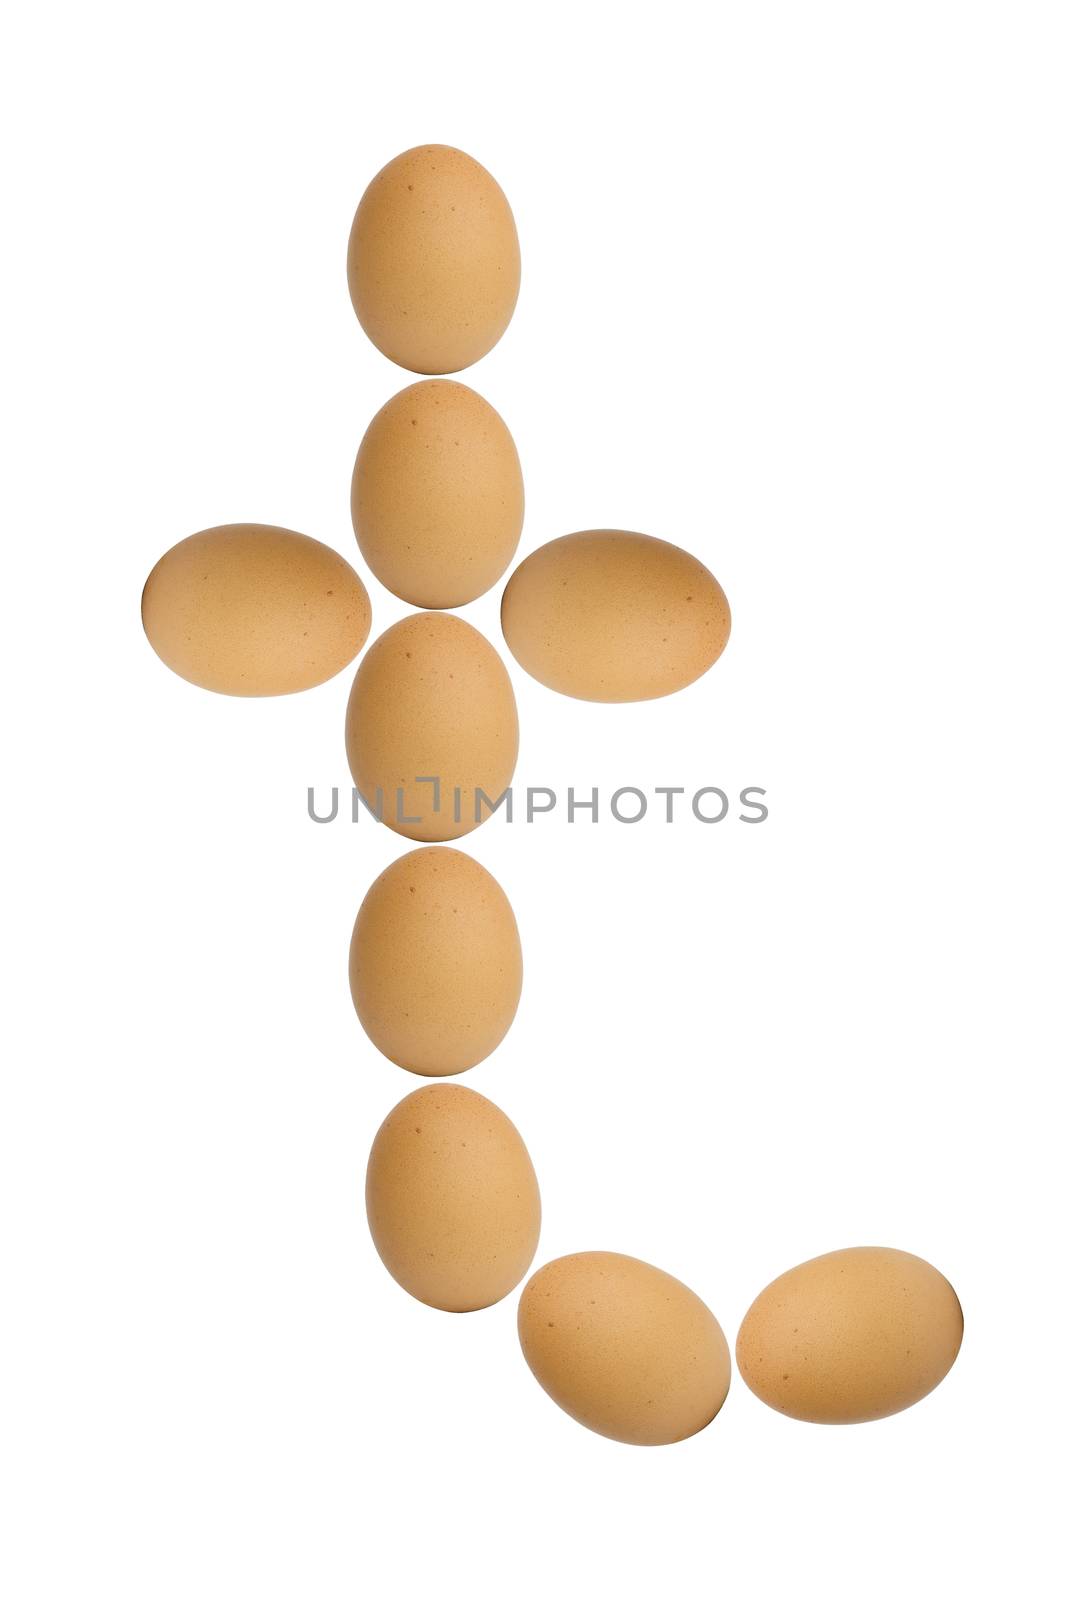 Alphabets  A to Z from brown eggs alphabet isolated on white background, t